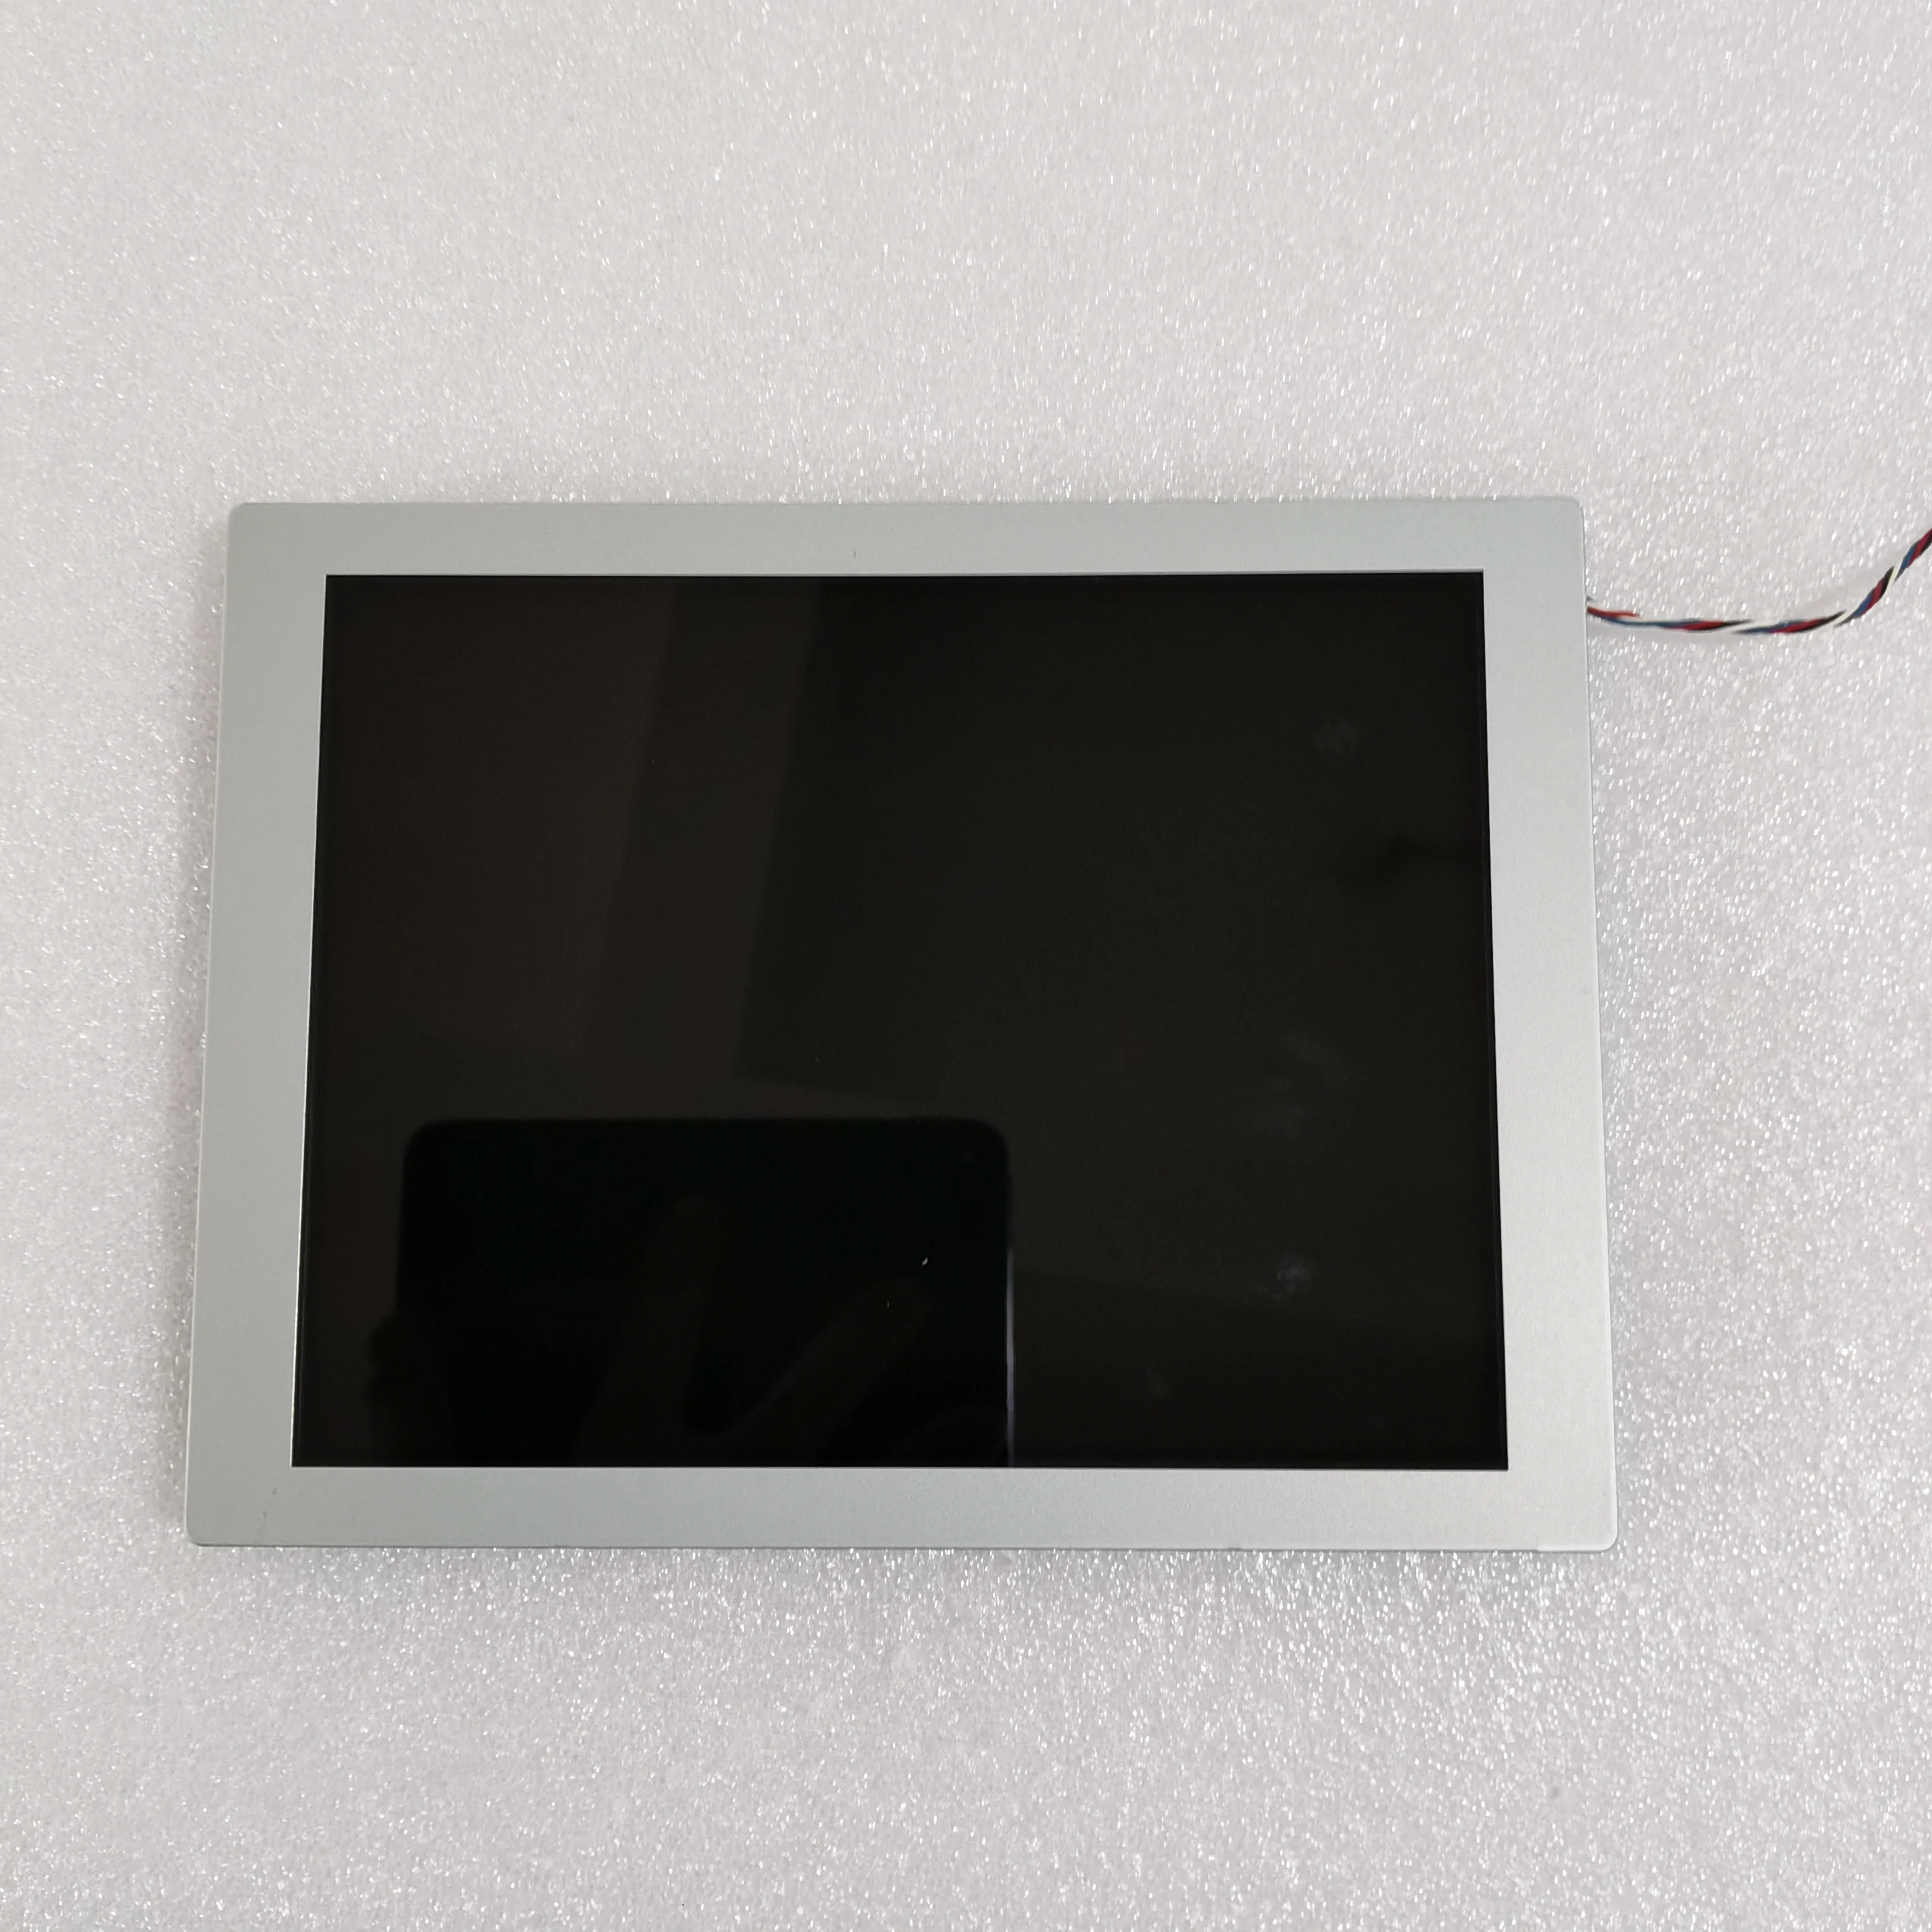 

For 7.5" TCG075VGLEAANN-GN00 640*480 LCD Display Screen Panel